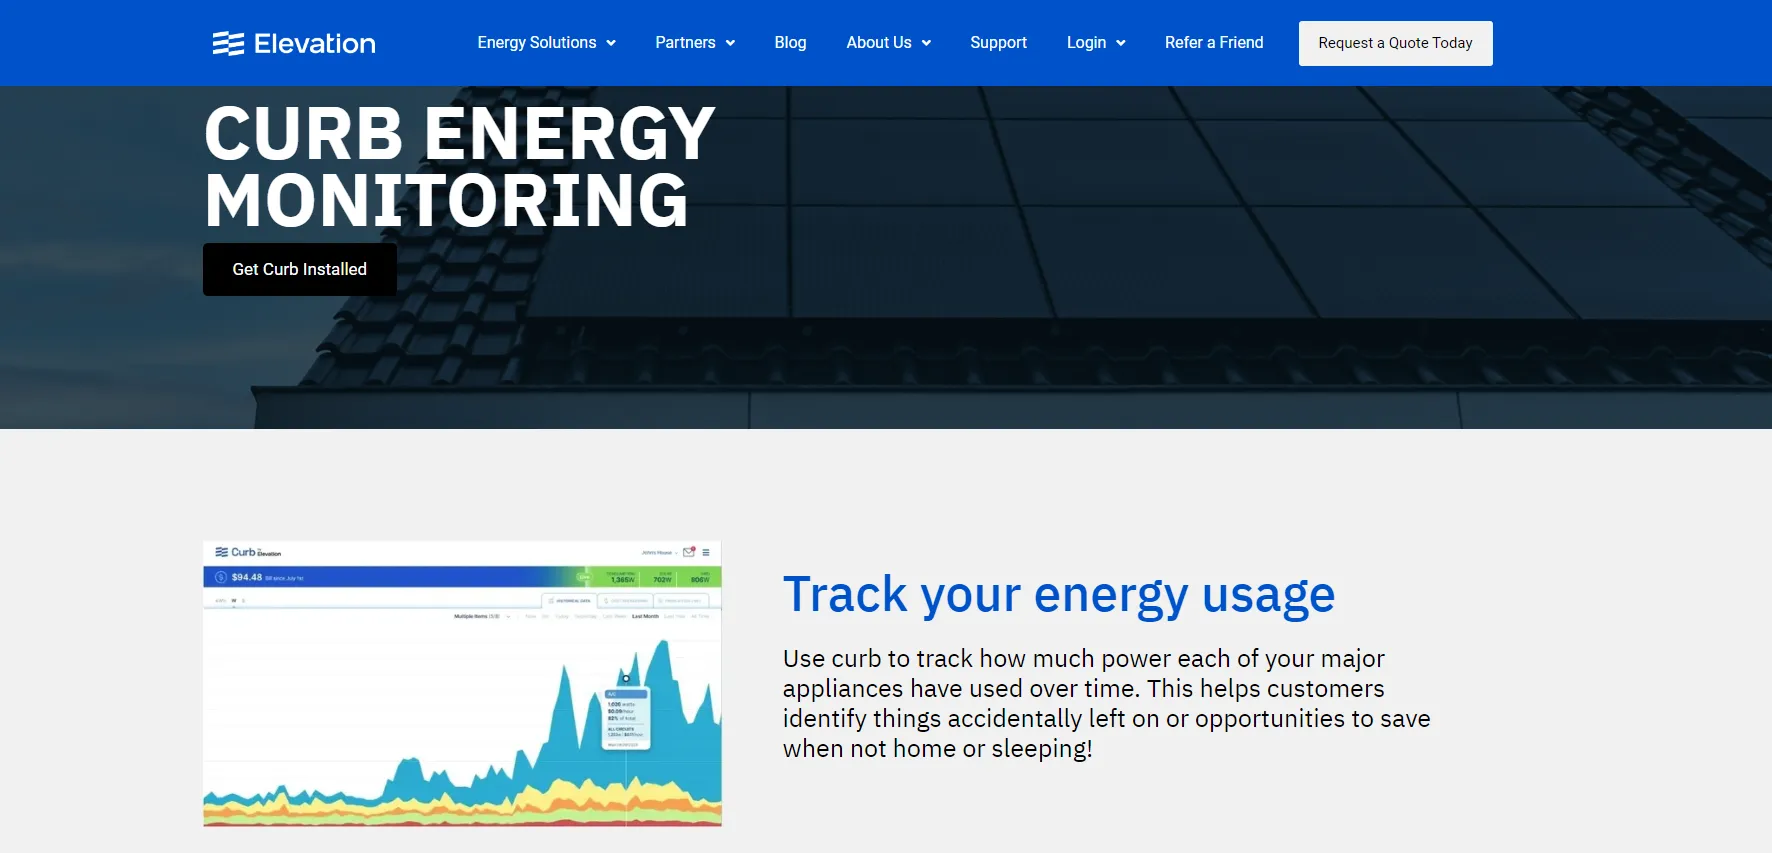 The homepage of Curb Energy Monitoring